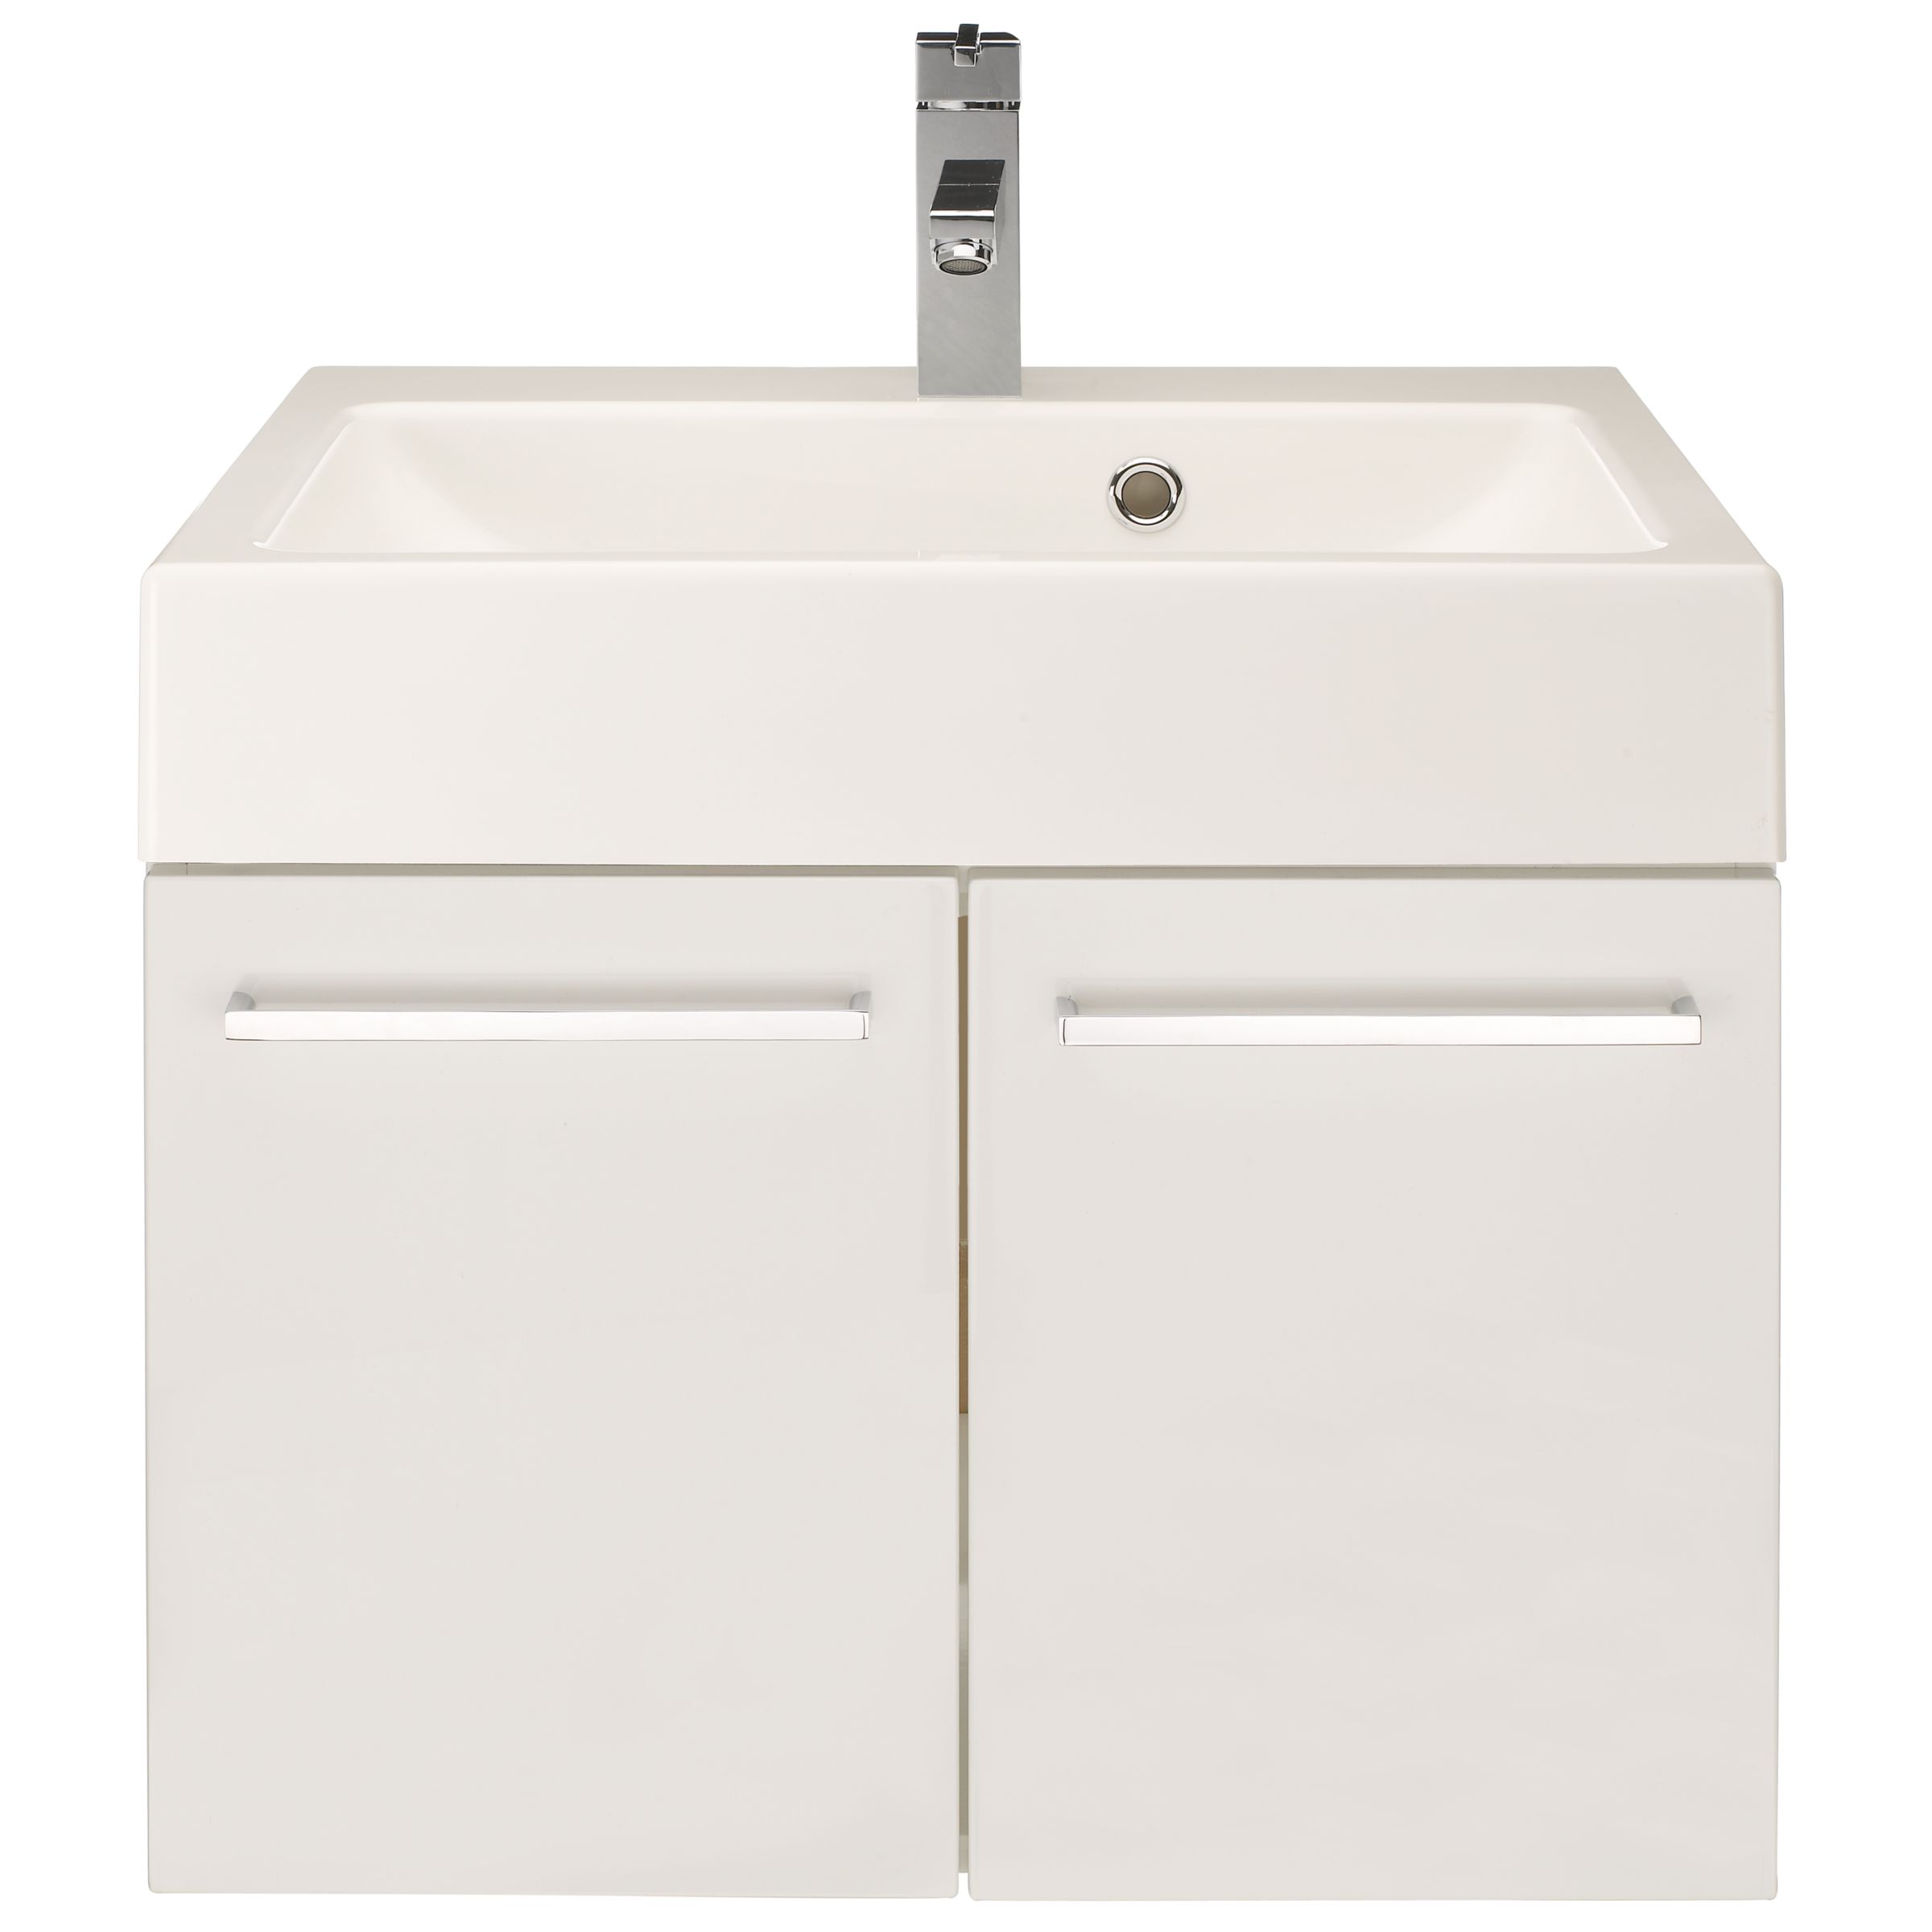 Double Door Vanity Unit including Basin and Tap, Gloss white at John Lewis